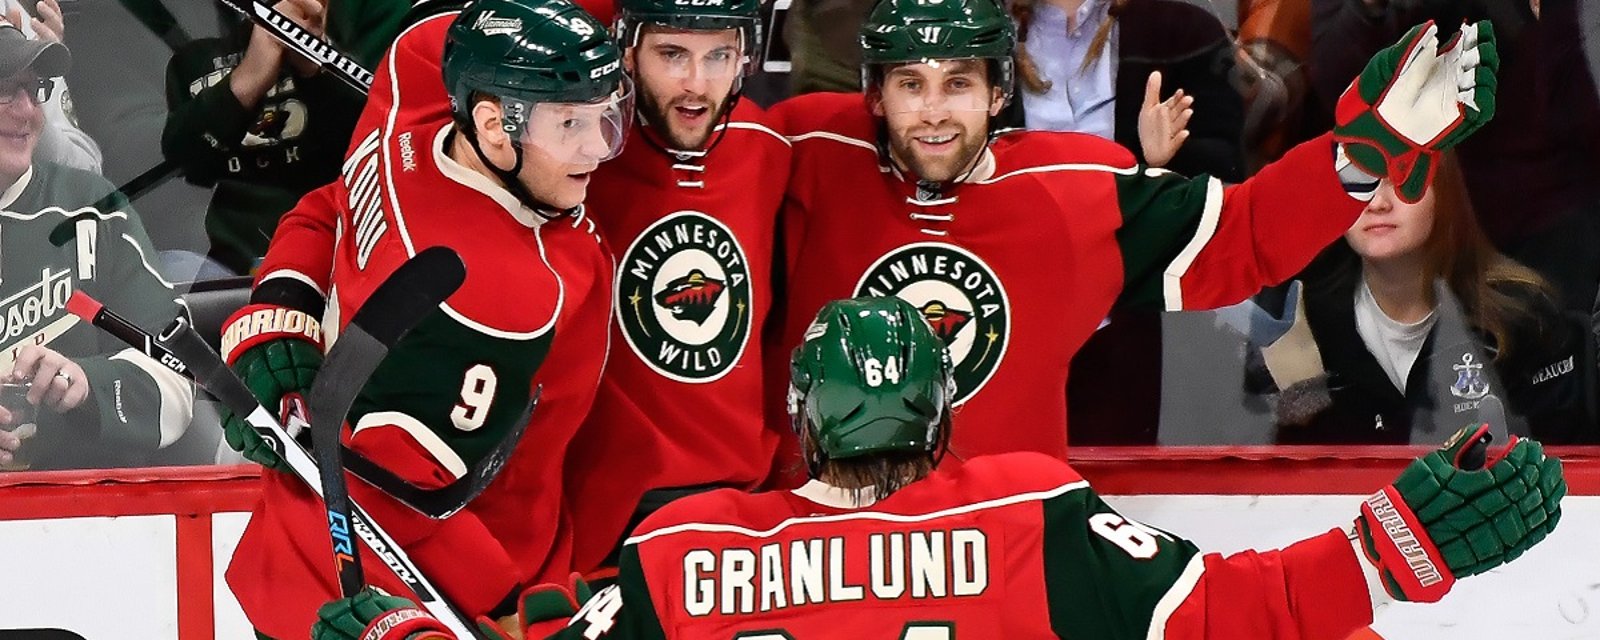 Breaking: Wild forward files for arbitration after failing to reach deal.